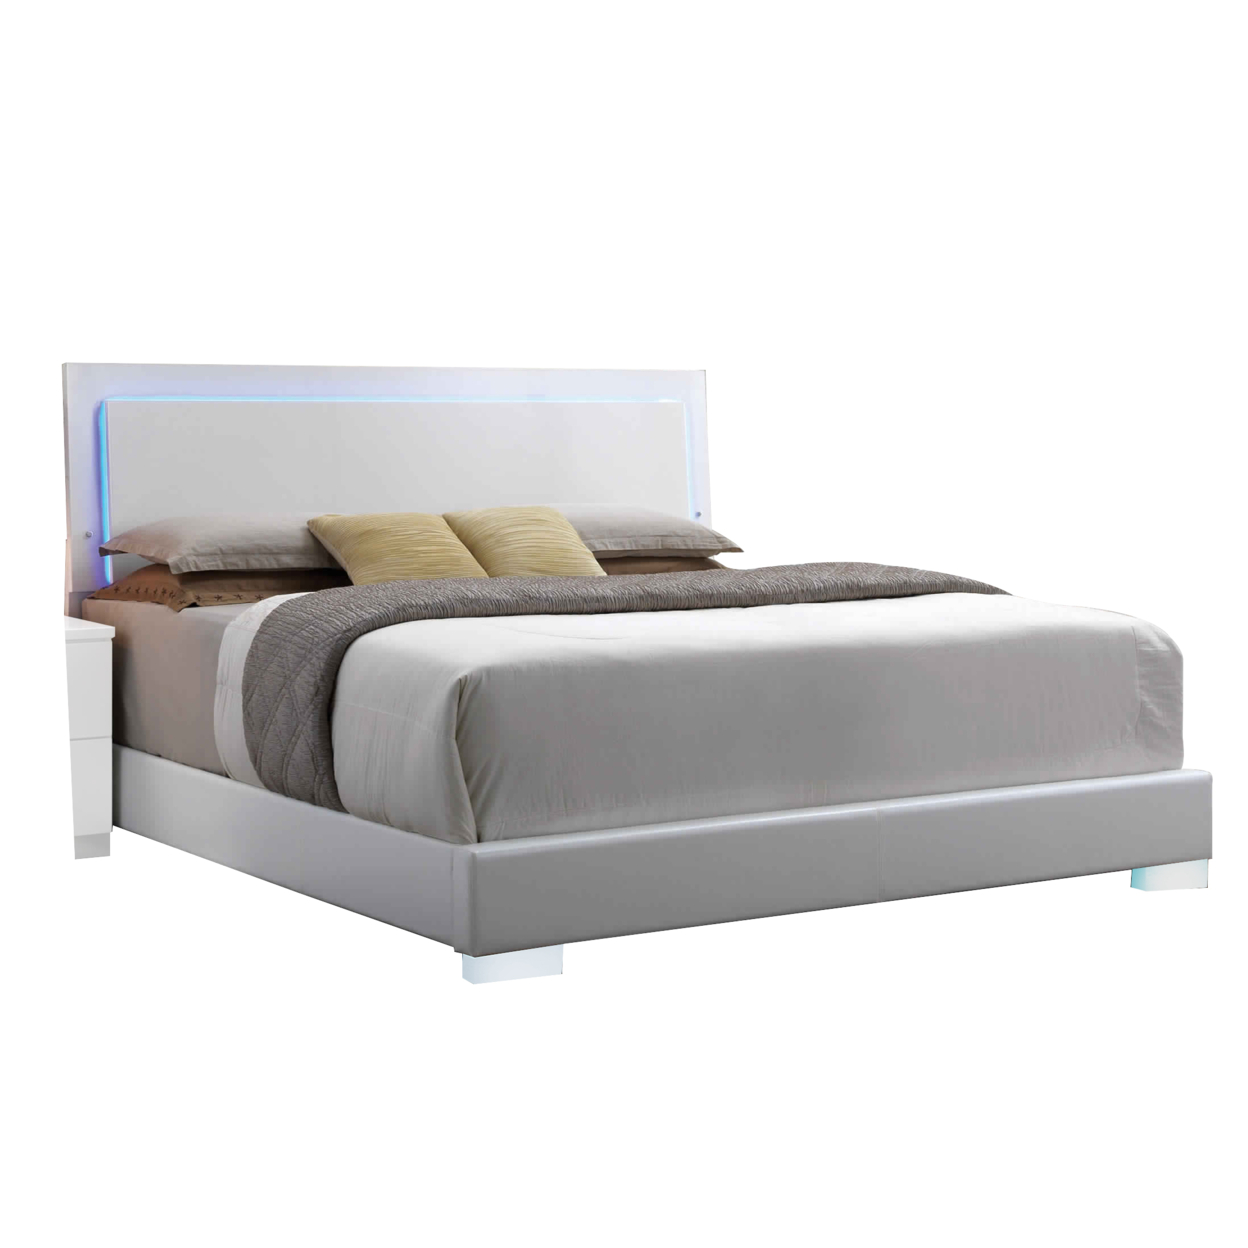 Leatherette Eastern King Bed With LED Panel Headboard And Chrome Legs,White- Saltoro Sherpi